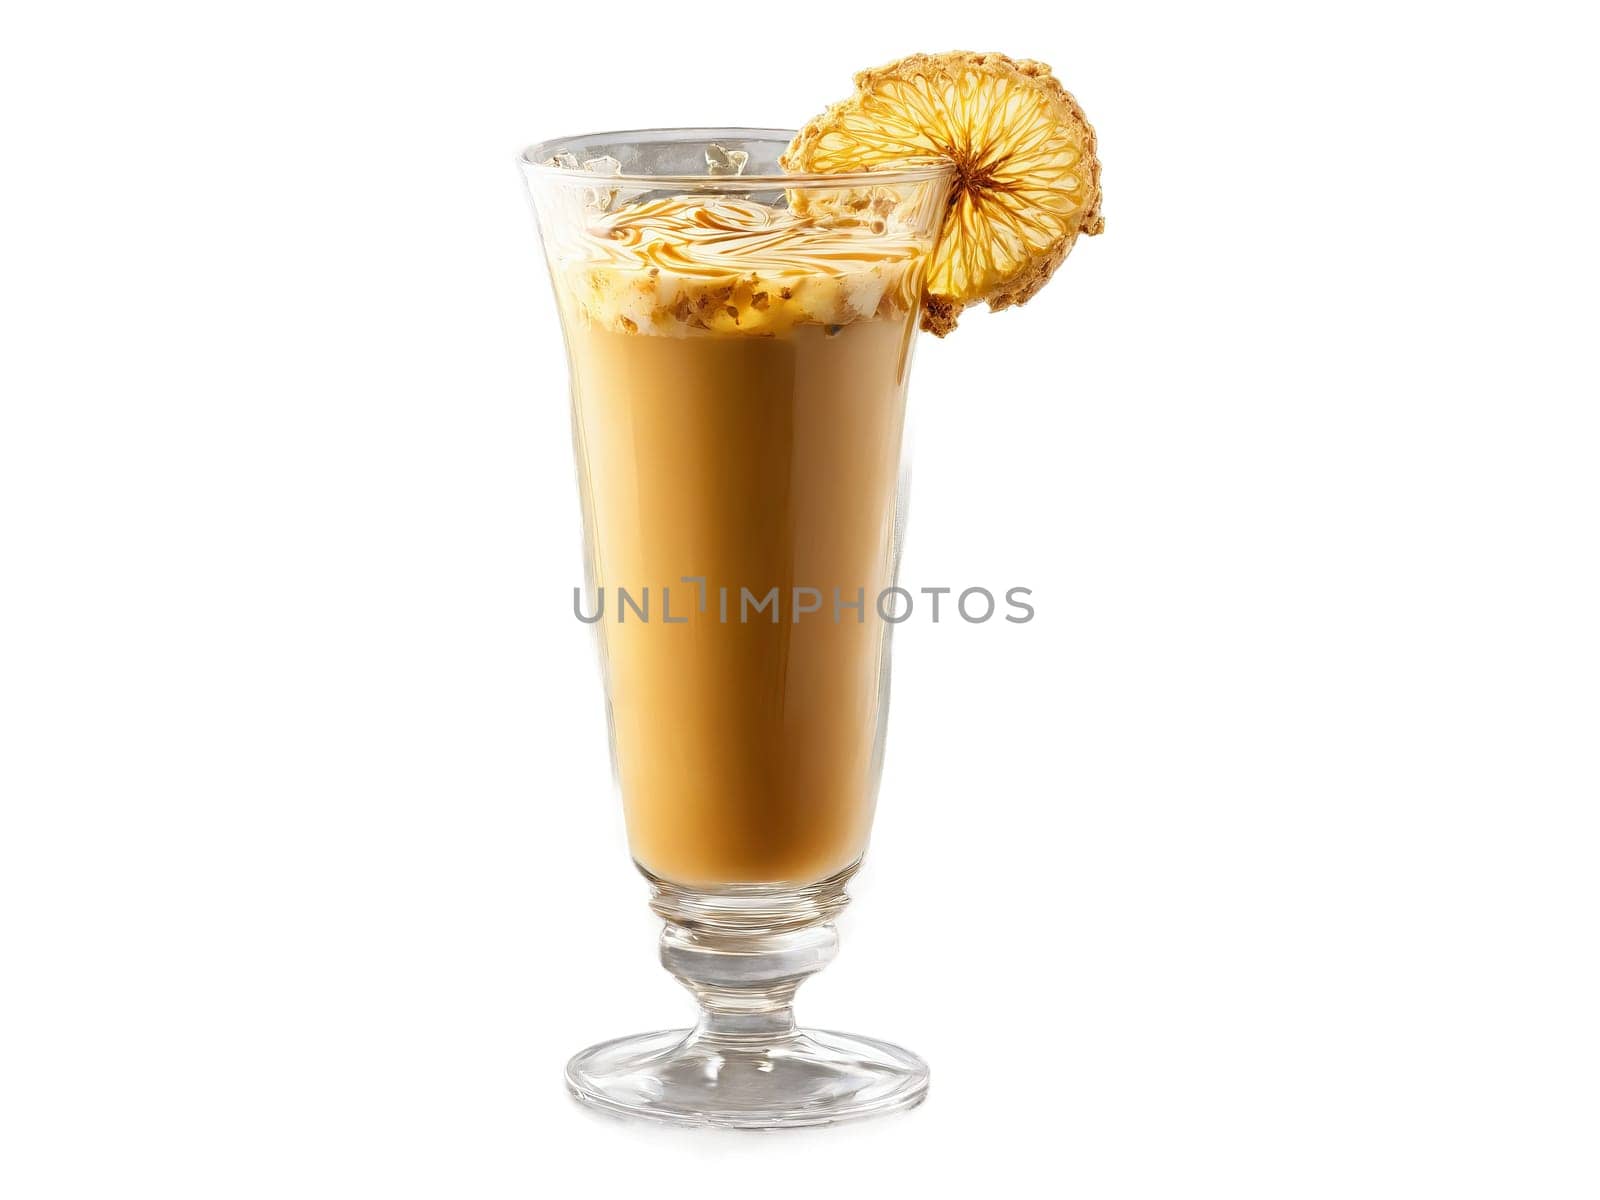 Ginger coffee in a clear tall glass ginger slice garnish dynamic spice swirl zesty and. Drink isolated on transparent background.